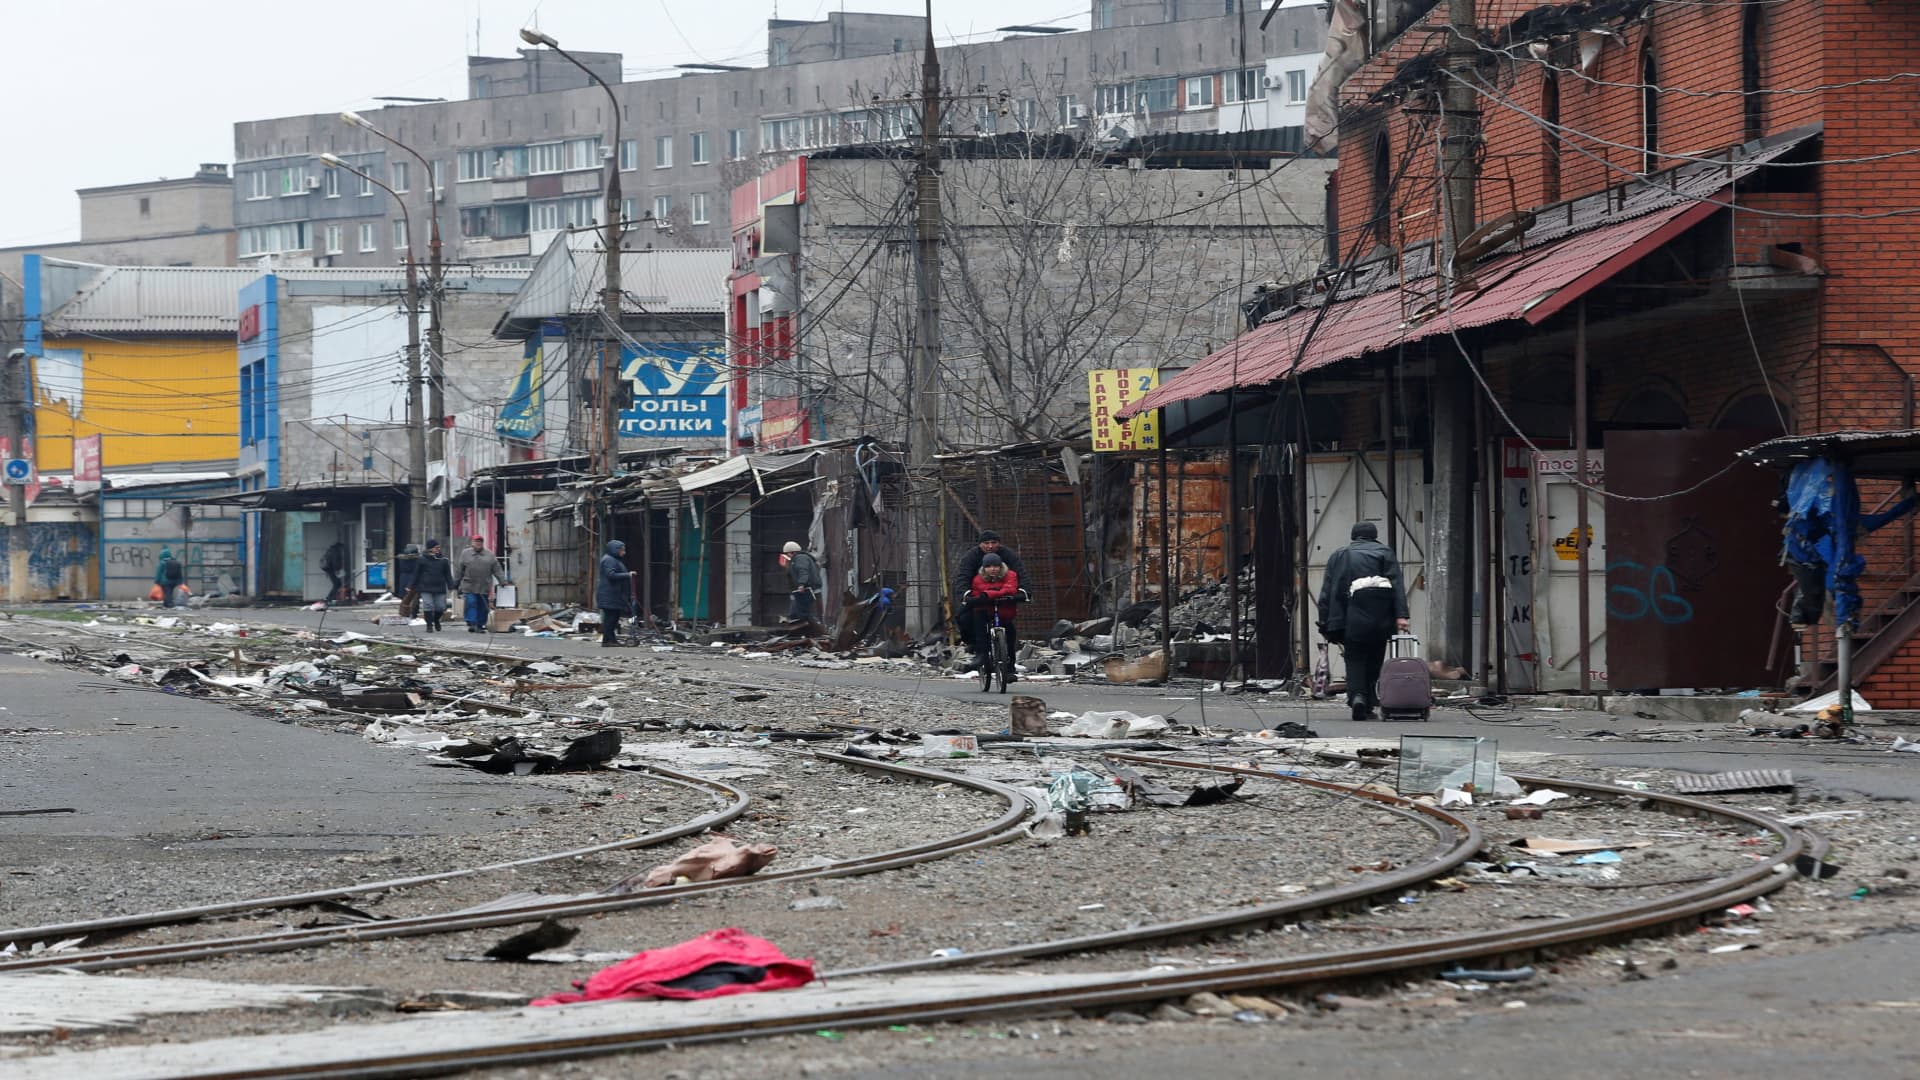 A view shows a street damaged during Ukraine-Russia conflict in the southern port city of Mariupol, Ukraine April 14, 2022.